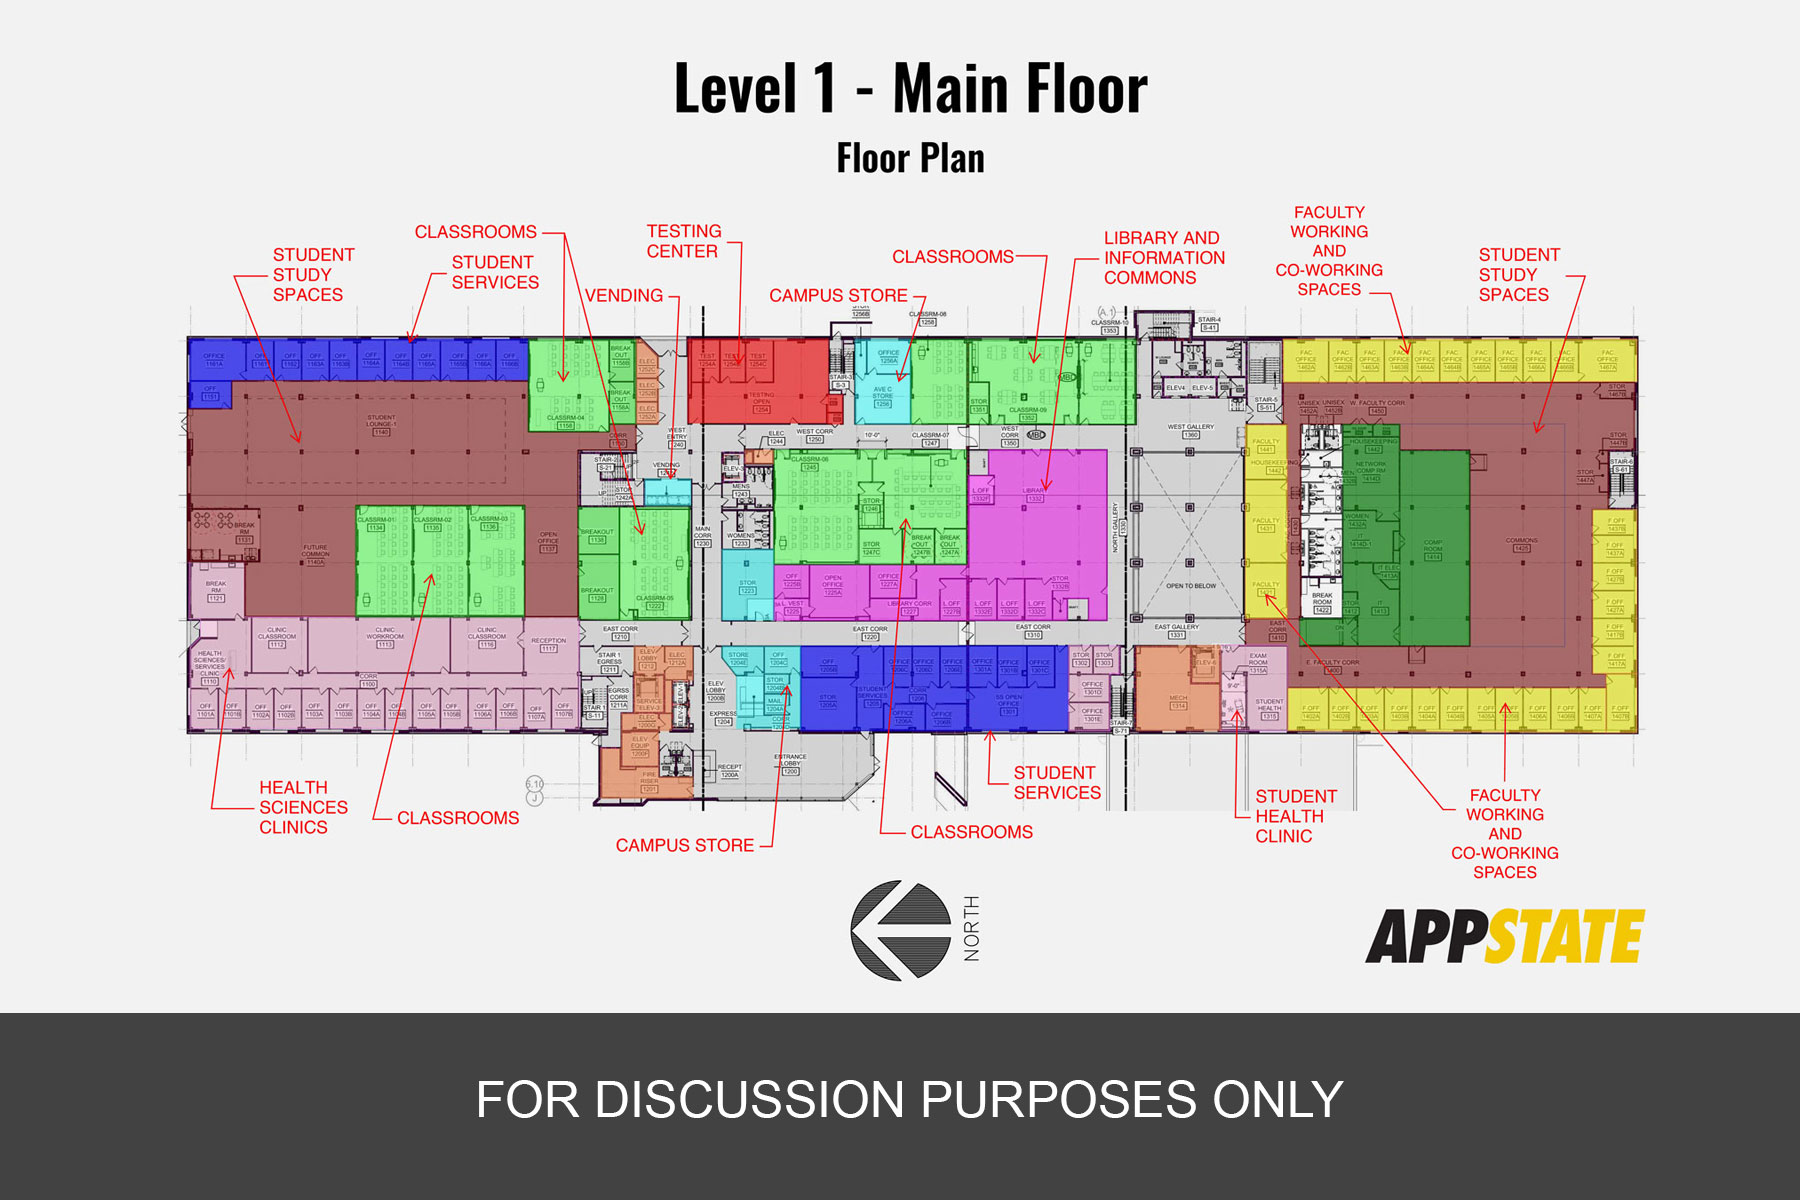 The planned layout for the first level of App State's Hickory campus